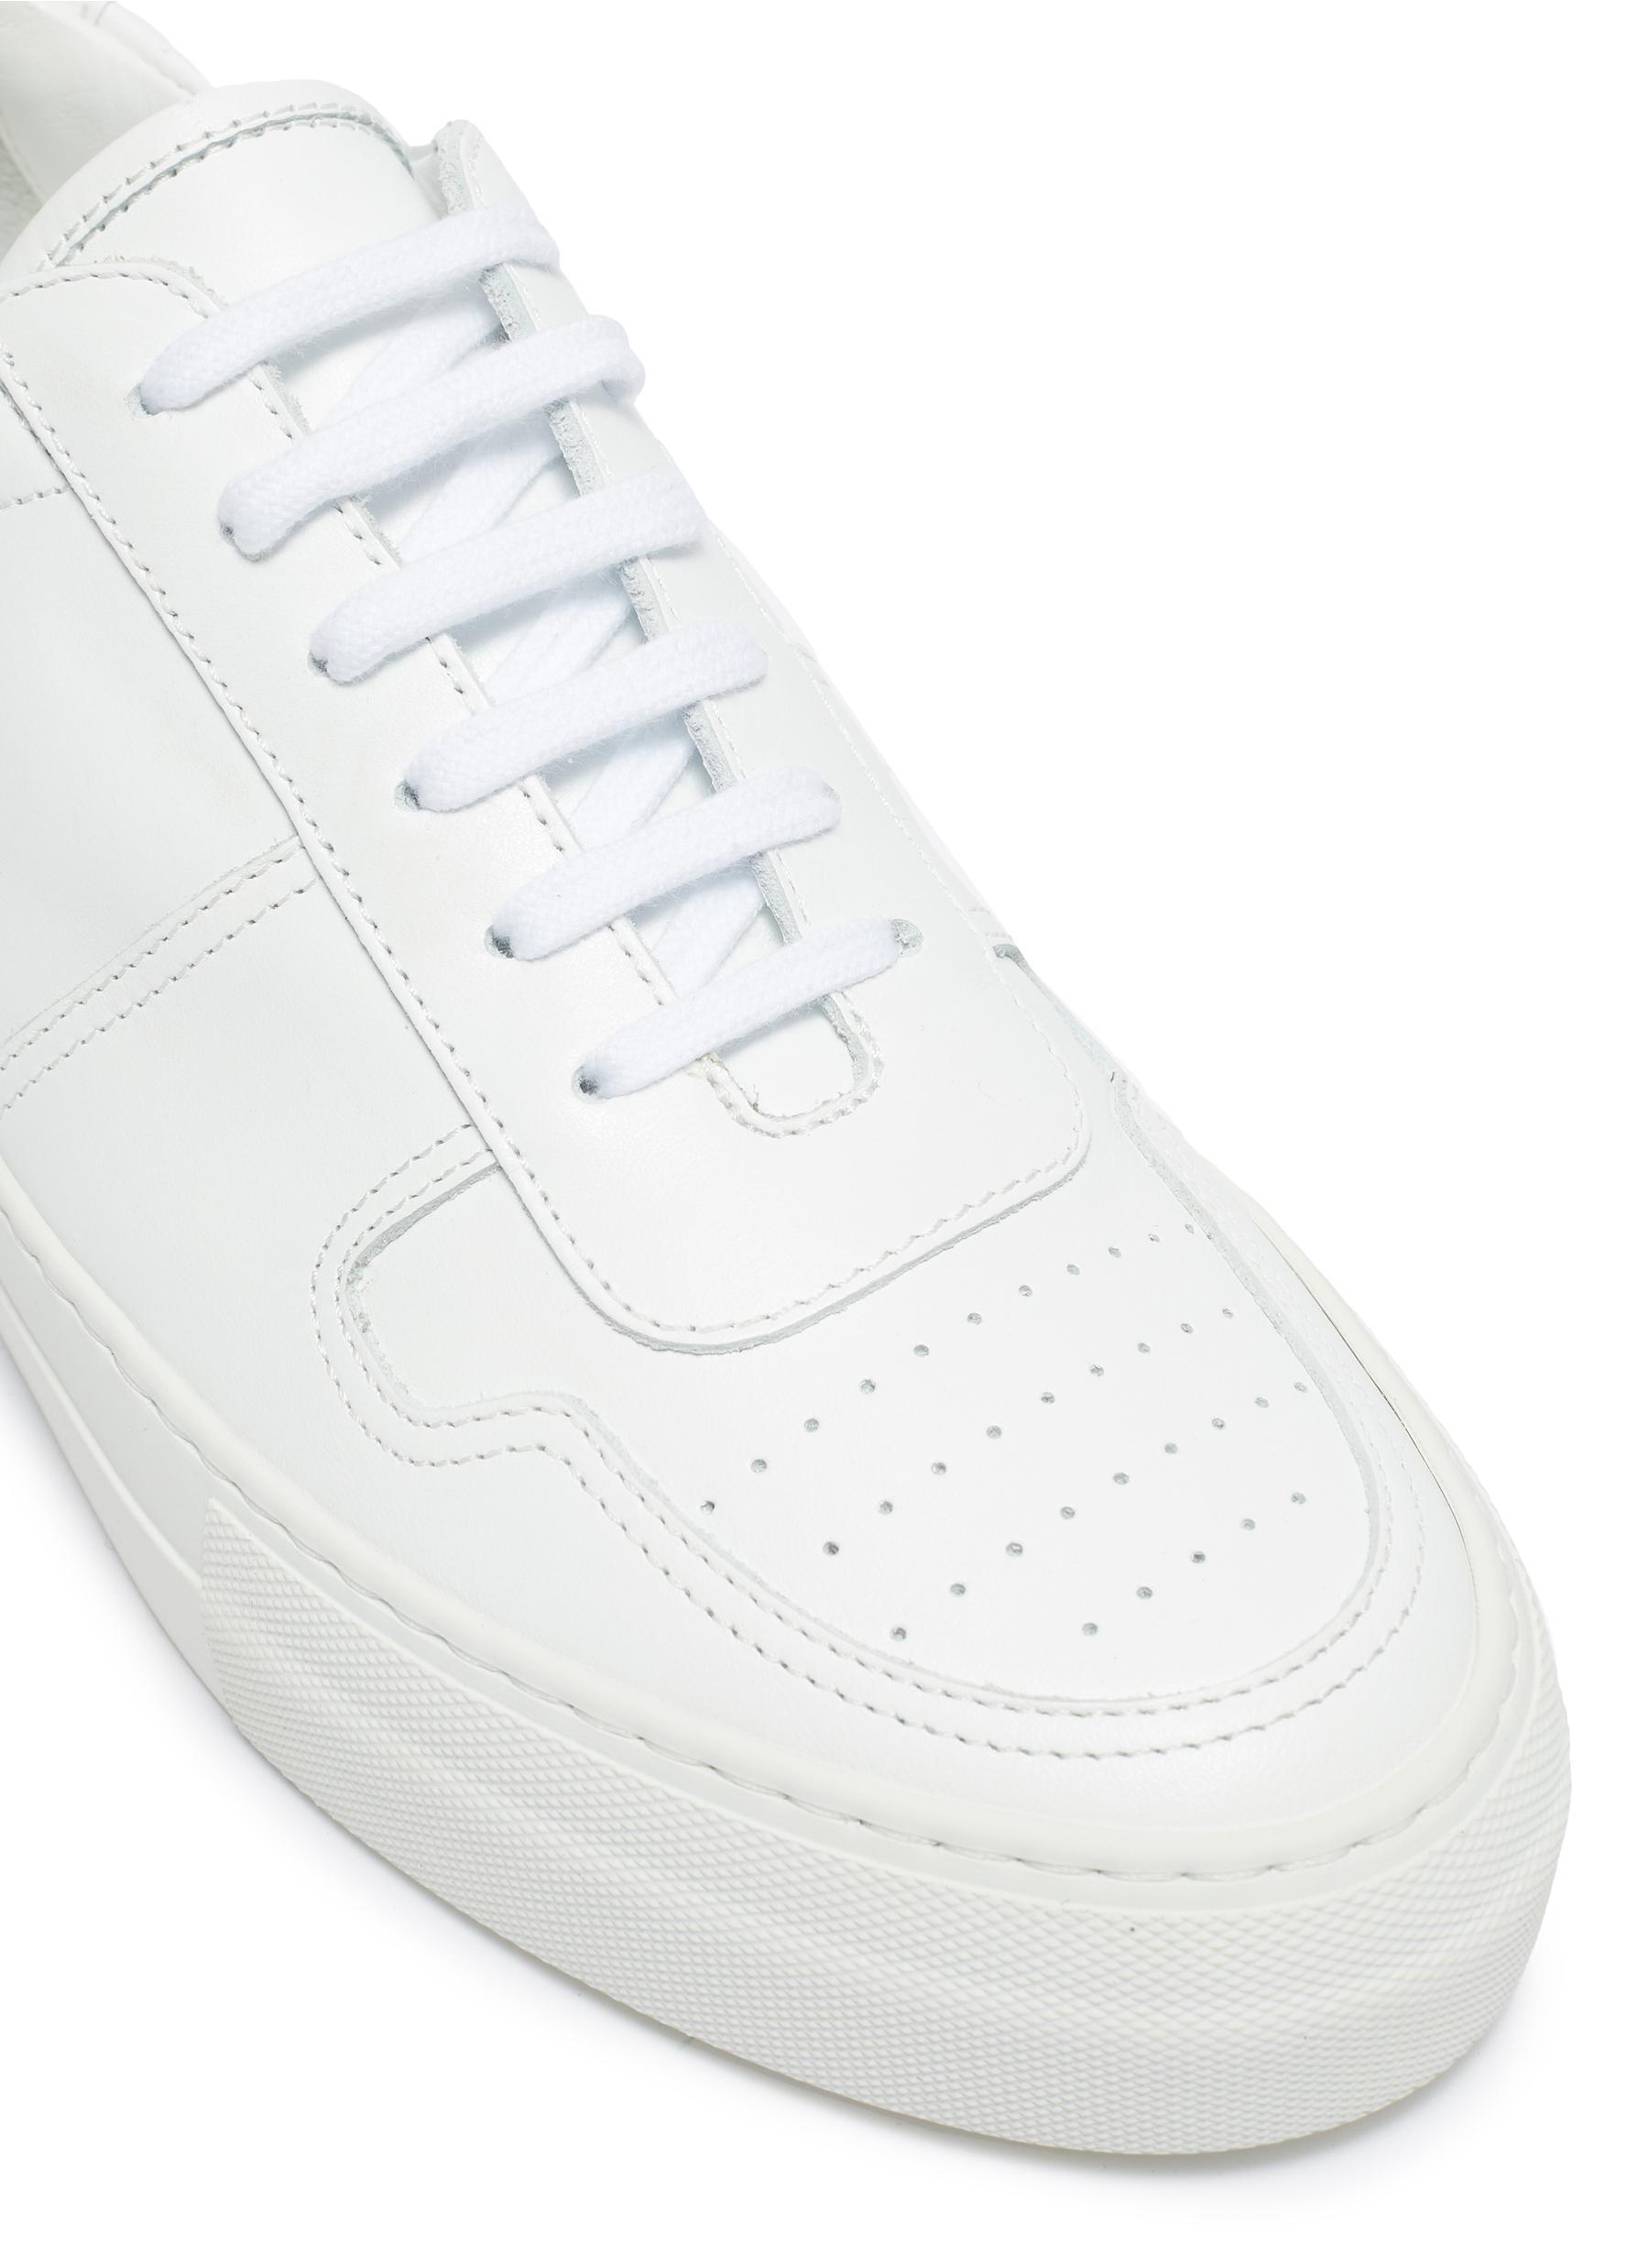 Common Projects Track 90 Sneakers In White | ModeSens